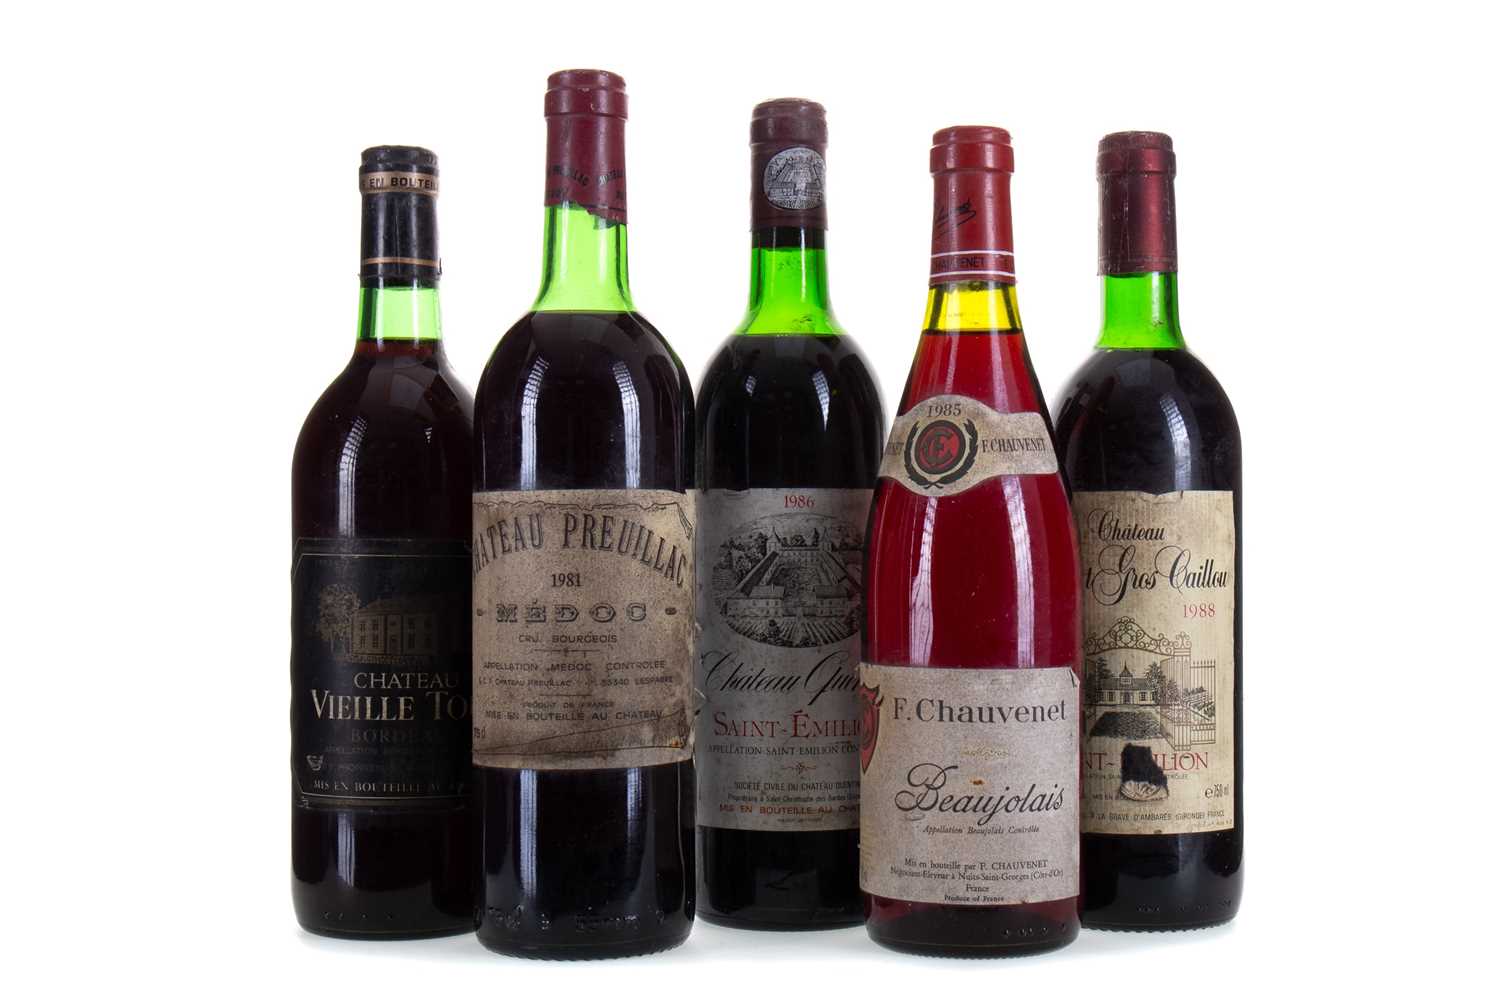 Lot 195 - 5 BOTTLES OF ASSORTED RED WINES - INCLUDING CHATEAU QUENTIN SAINT-EMILION 1986